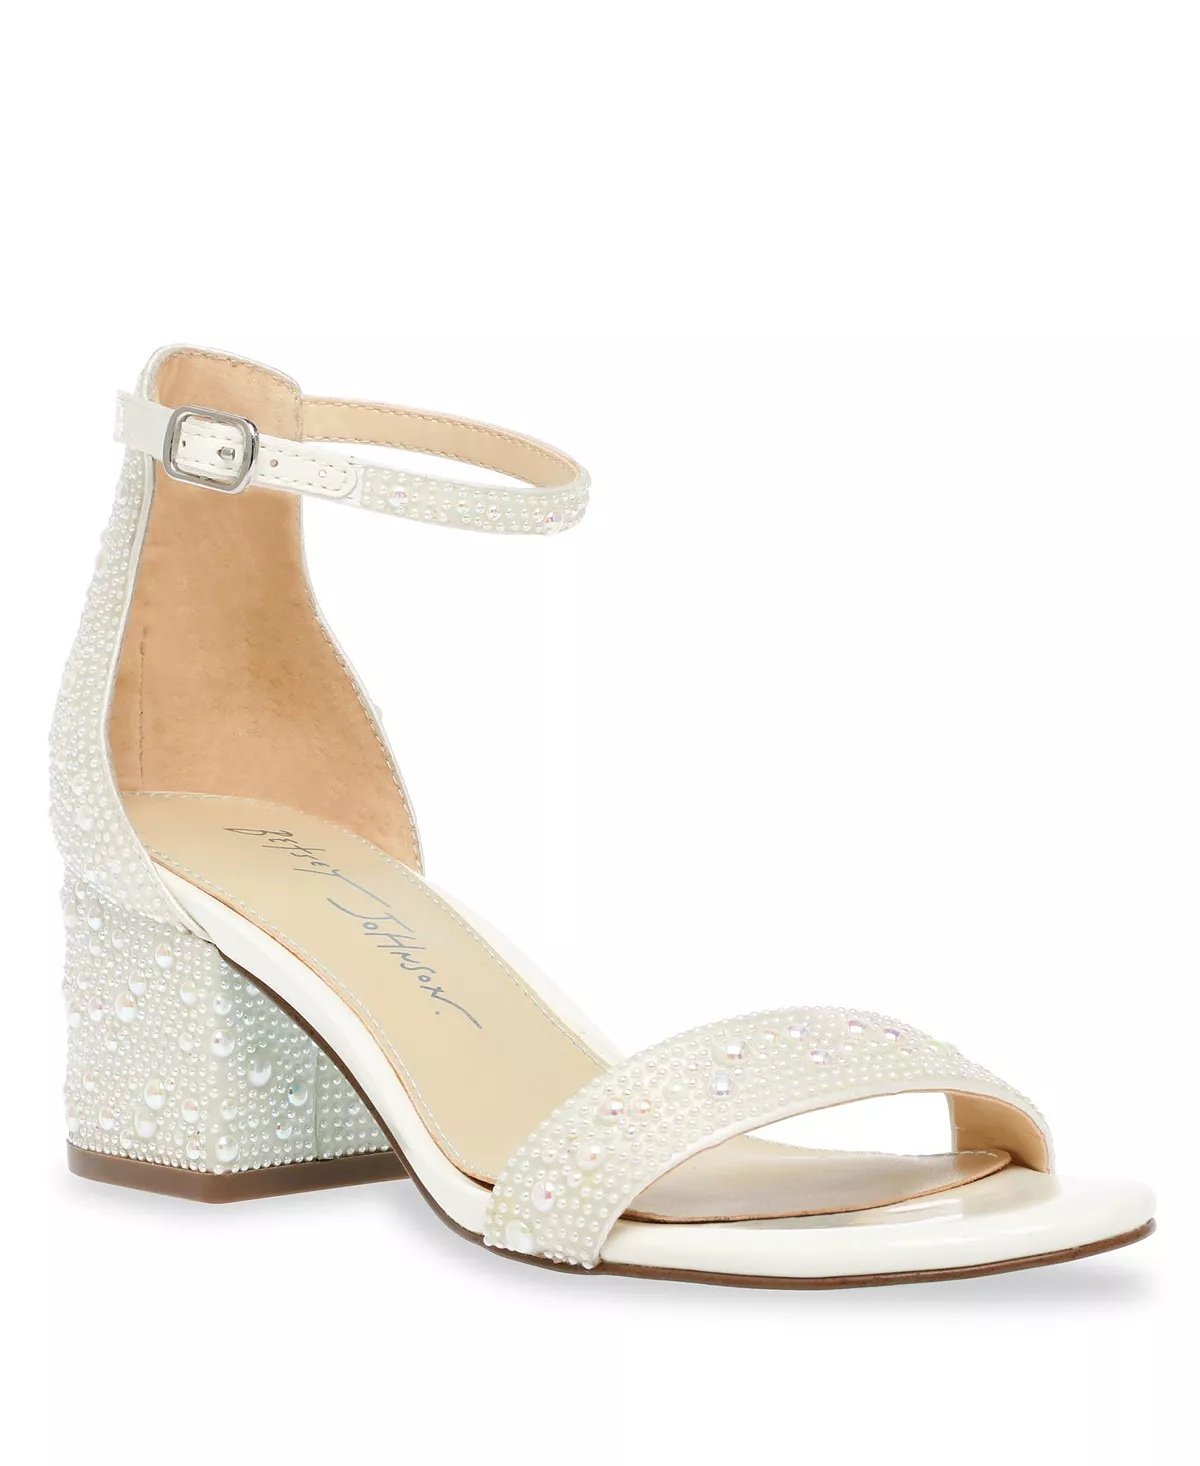 23 No- and Low-Heel Wedding Shoes We're Loving Right Now - Washingtonian